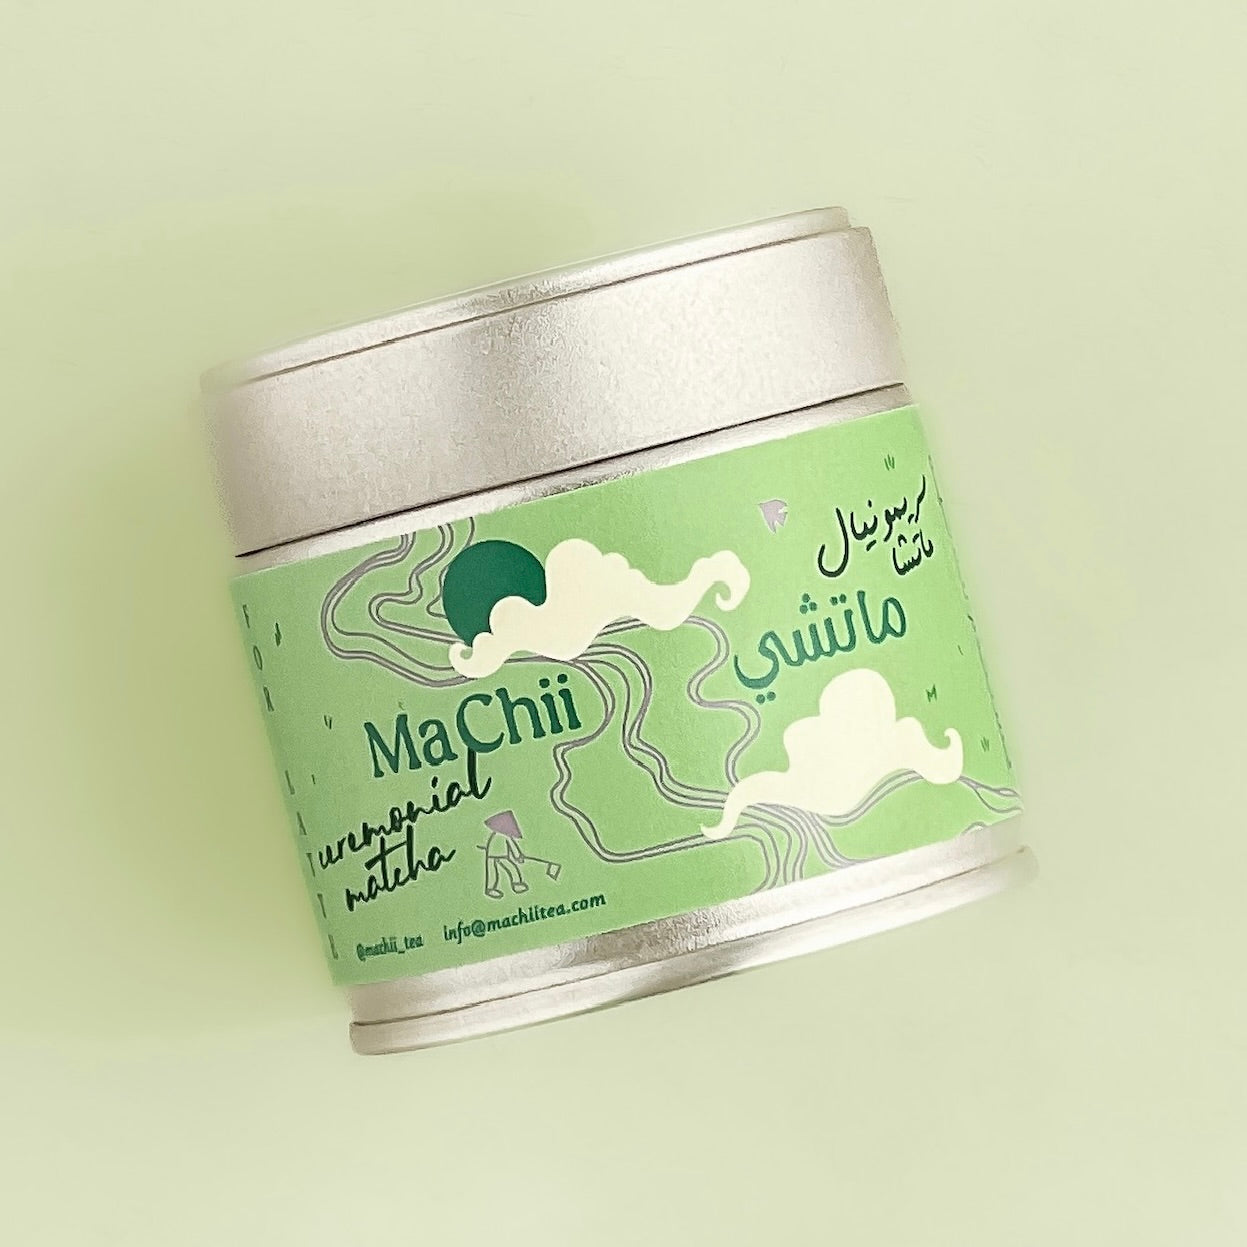 Ceremonial Matcha - For Lattes (30g)